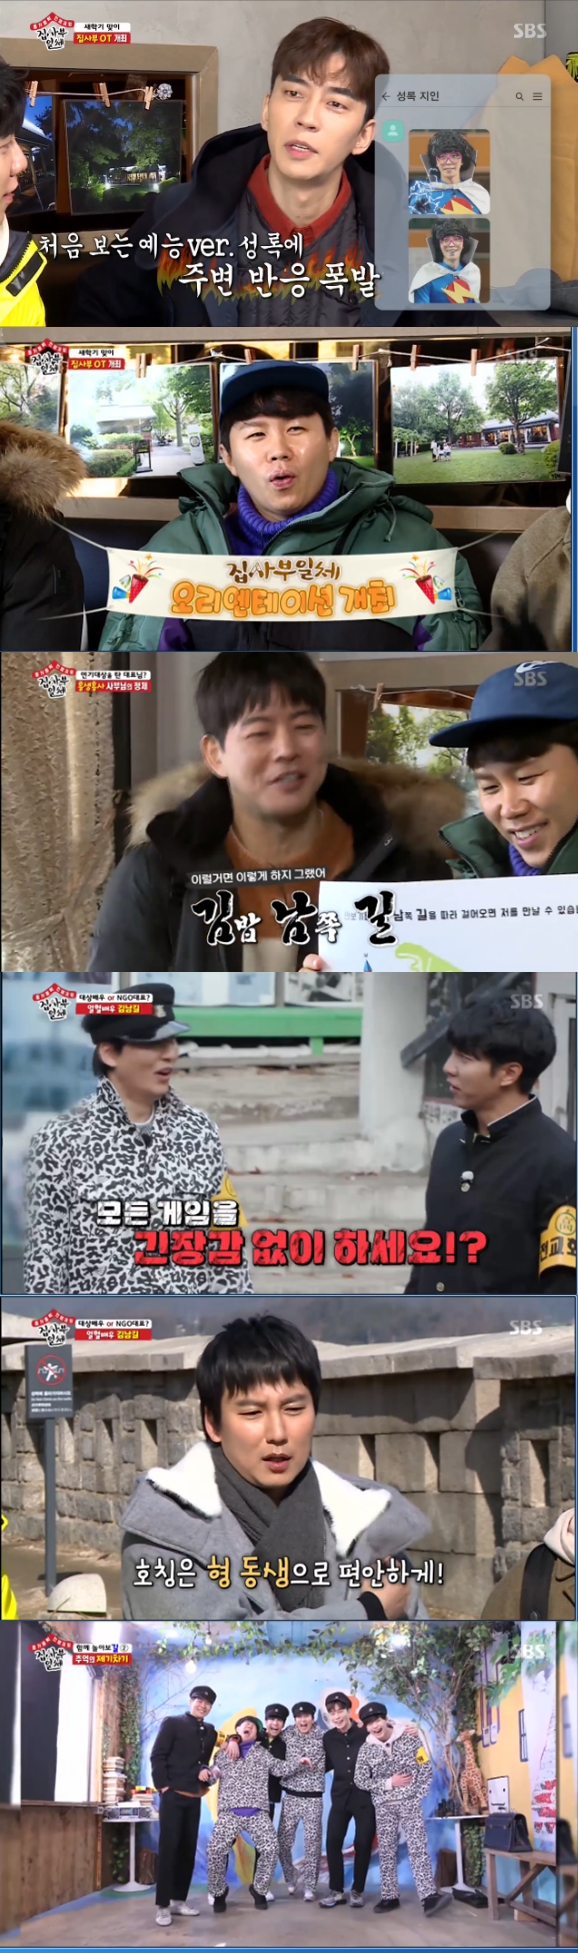 Kim Nam-gil, a feverish master, showed fantastic breathing with the members.In the SBS entertainment program All The Butlers broadcasted on the 9th night, Kim Nam-gil, a heated actor, came out as a new master and left OT with the members.The production team asked Shin Sung-rok about the first broadcast and the reaction around him.Shin Sung-rok said, Everyone is said to be new, he said. Especially, he responds to the lightning man.Lee Seung-gi said, Usually, when a new member comes, the recording is centered on the member, and we did not have anything like that.The production team told the members, We plan to go to OT with a new master in March.The crew, who told the members that they planned to go to the OT with the new master, handed the phone to the hint fairy and called.There is no one among the comedians who can not imitate his vocals, Yang said. The hint fairy was Jeon Do-yeon.Lee Seung-gi asked, Do you have a relationship with me? while talking to Jeon Do-yeon.Jeon Do-yeon confessed that her daughter had signed her autograph because she was a Lee Seung-gi fan in the past.So, the foster child asked, Do you still like Lee Seung-gi? But Jeon Do-yeon did not answer and laughed.Jeon Do-yeon gave the members a decisive hint about the new master: she said she liked the master to walk and asked the members, Did you come wearing comfortable shoes?The members expressed concern that I think I should walk a lot today.Jeon Do-yeon said, I recently received the acting target, making the members confident about the new master.The crew gave the members a hand-me-down and ordered them to go somewhere. The mission paper between the masters said, Come to the end of the south road.Members who were already convinced of the identity of the new master said, If you do this, just let me know Kim Nam-gil.At the end of the south road Kim Nam-gil was waiting for the members.When I saw Kim Nam-gils back, the members said, I feel his unusual kick even if I see him walking.Kim Nam-gil, who laughed and laughed, eventually could not bear the laughter and revealed his identity to the members.Kim Nam-gil said, It is not a priestly salary, but it is the intention to play together in the new year this year. Lets play comfortably as a brother.Kim Nam-gil showed a passion to bring the daily routines in person, saying, Ive been preparing a little bit. He briefed the New Years Eve OT with Kim Nam-gil.Kim Nam-gil, who is also running a culture and arts NGO Gil Story as a representative of a nonprofit organization, said that he is spreading positive energy through cultural sharing.He has been walking the road for eight years silently, saying, Everyone knows I am good, but I am not a good person, a good person.I walked along the alleyway along the gaze of Kim Nam-gil, who was a hobby of taking pictures, and I found a hot dog house and enjoyed a dinner on the alleyway of memories.The members changed into their school uniforms and went back to those days.Kim Nam-gil said, Lets go with old emotions because were dressed like this. He divided the team and put on rubber shoes and played a scenic show.When asked about the meaning of the kicking and scabbling play, Kim Nam-gil said, Enjoy it unconditionally, play properly without thinking while playing.The winning team started the game with the winner to hit the night, and the nightly charge without blood or tears laughed.Headed to Soul Place by Kim Nam-gil, a man who reads the way; Kim Nam-gil, who changed into a training suit, was excited to say its my favorite place.His Soul Flace identity was the comic book room: Kim Nam-gil was surprised by the comic caffeine visuals, followed by the members summoning memories from school days.Above all, teamwork exploded during the game, and Kim Nam-gil laughed, saying, If you breathe this much, you should fix it instead of guest.